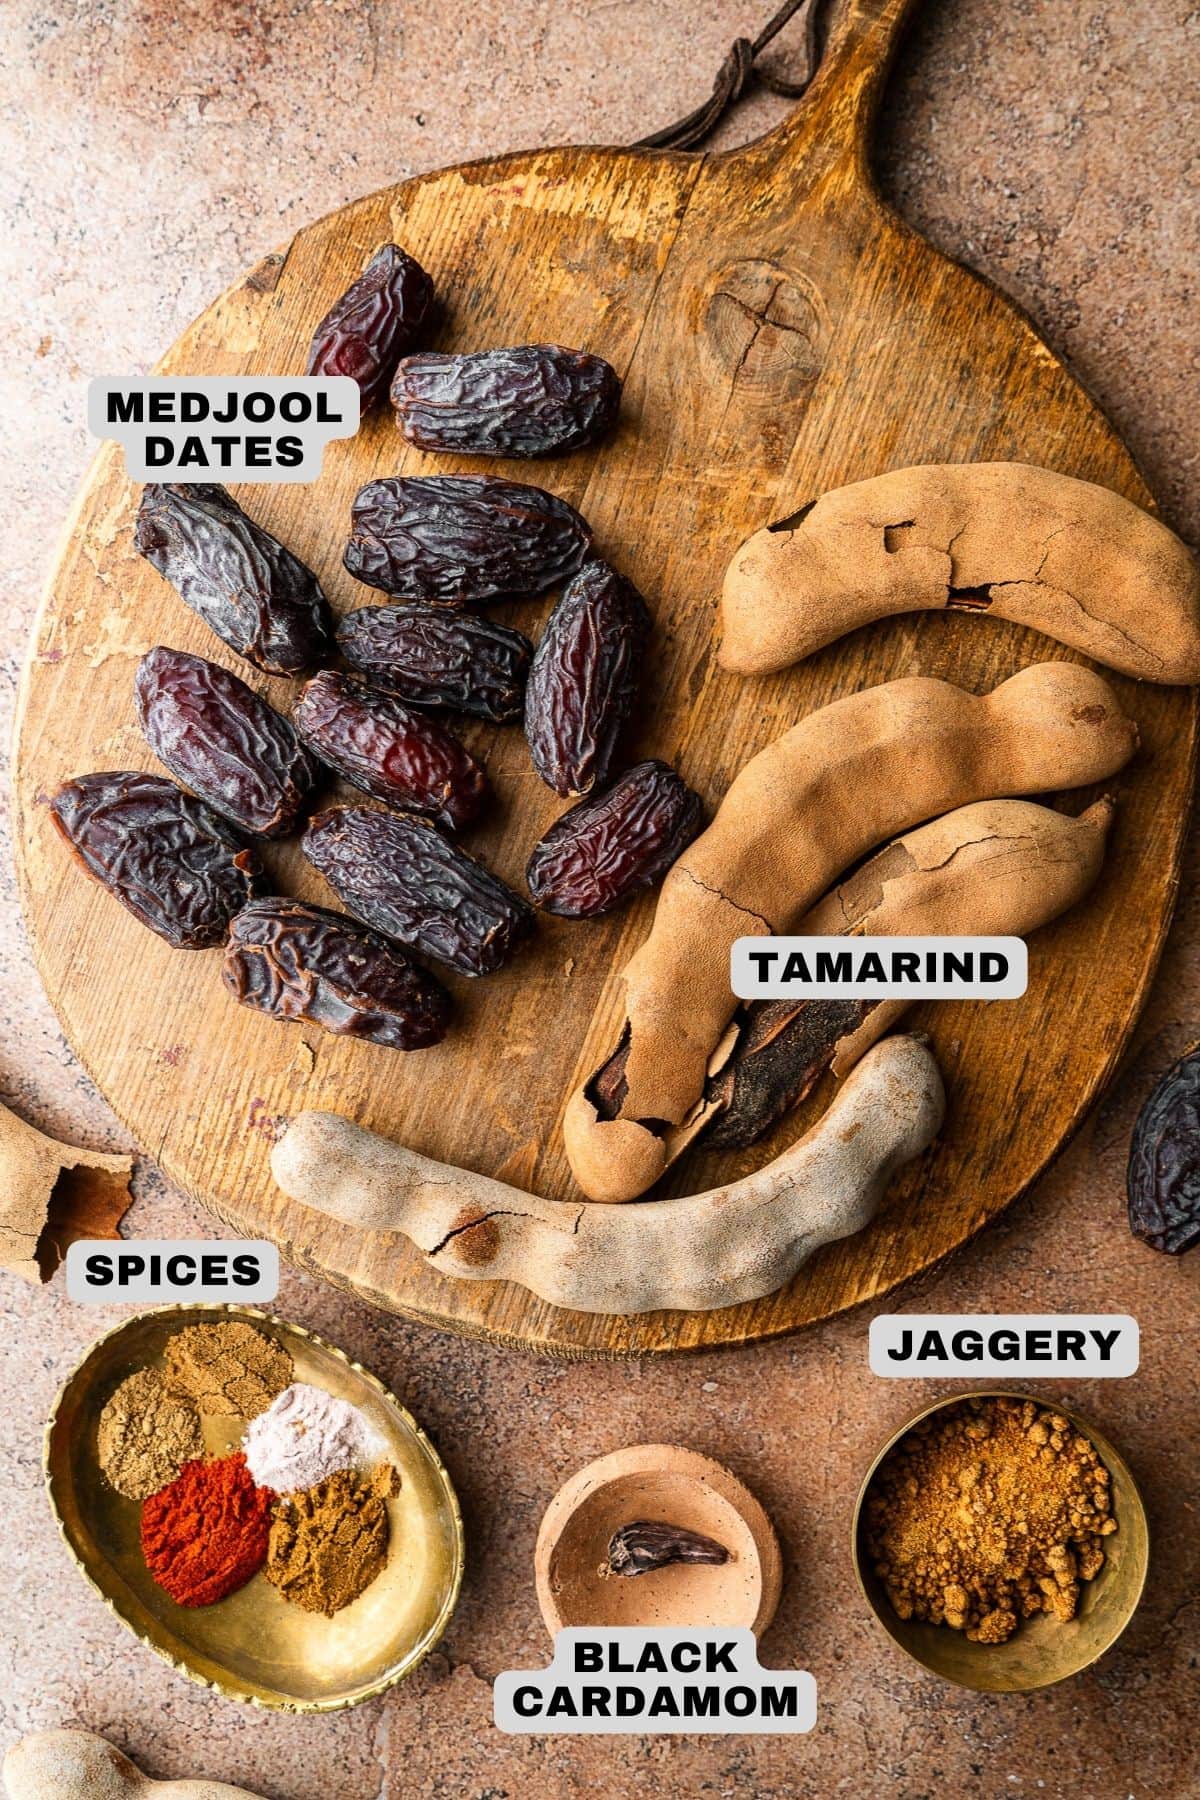 Medjool dates, tamarind, spices, jaggery, and black cardamom ingredients with labels.